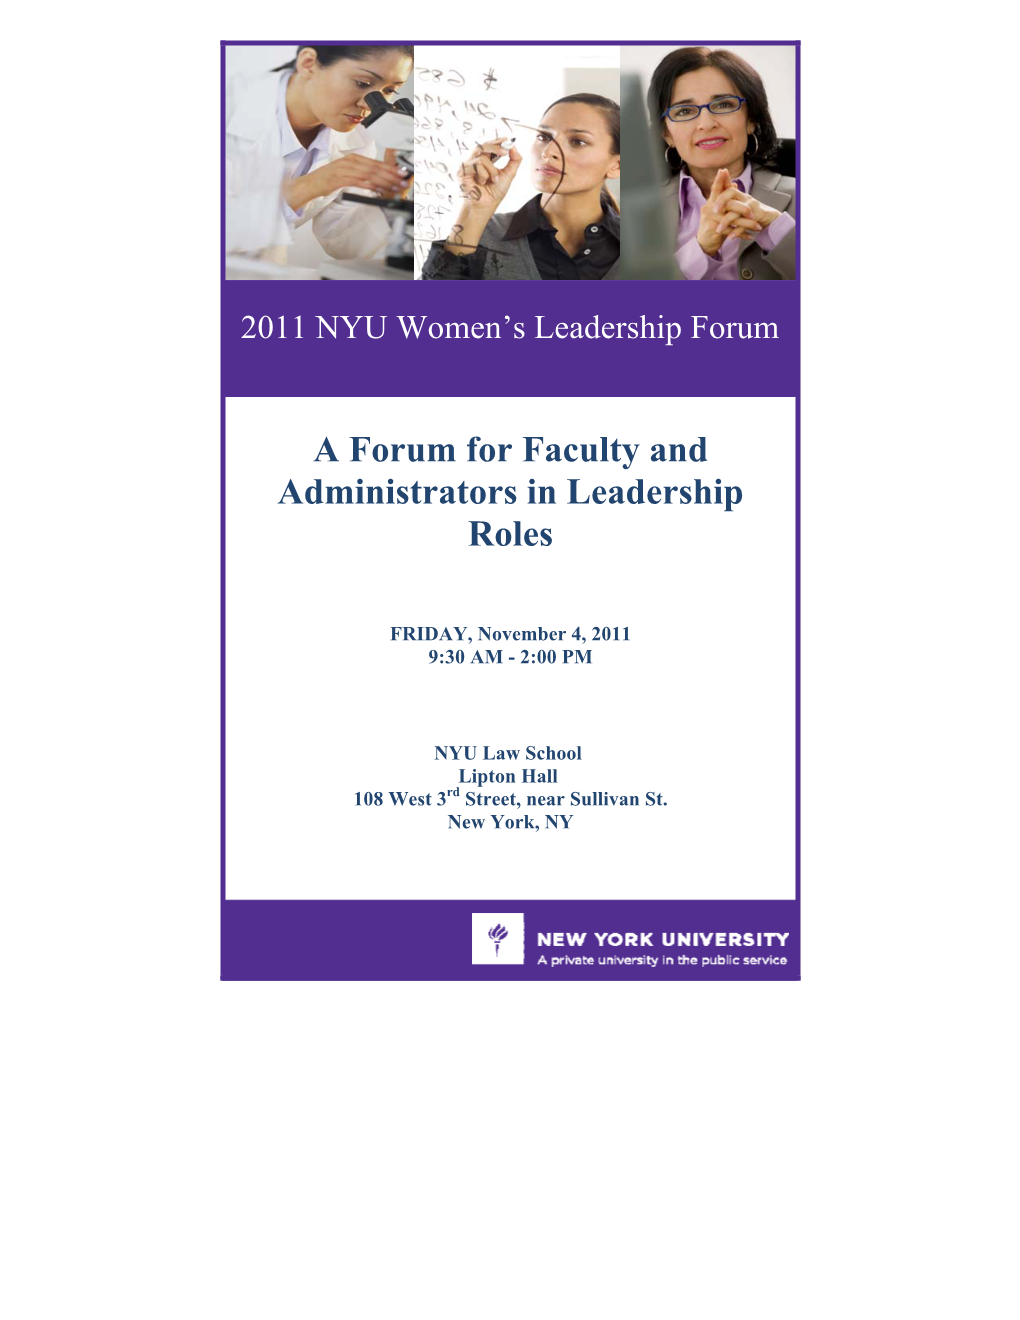 A Forum for Faculty and Administrators in Leadership Roles